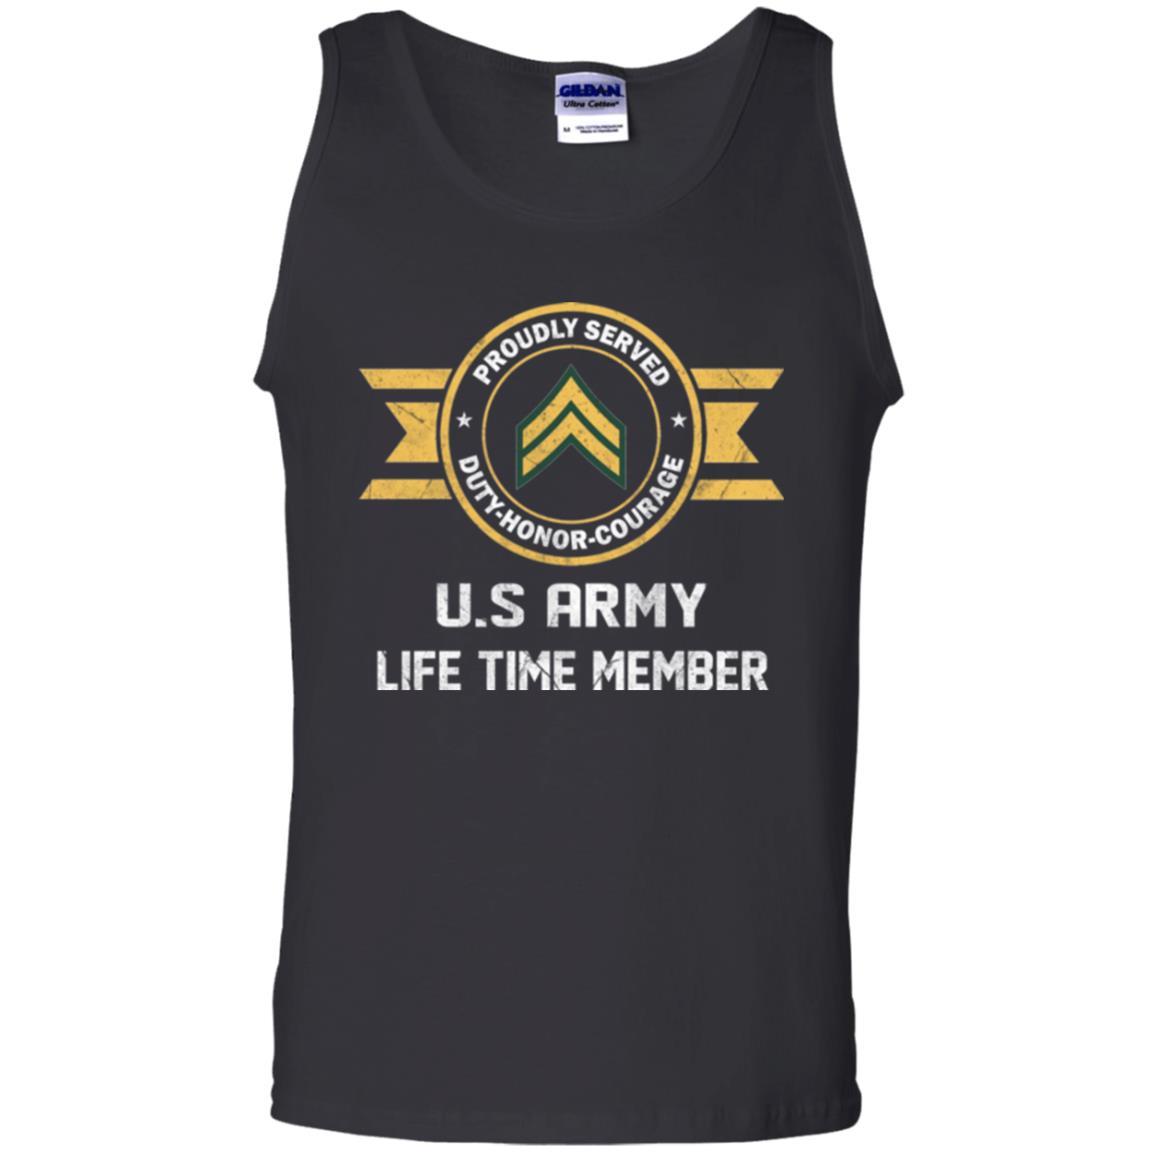 Life Time Member - US Army E-4 Corporal E4 CPL Noncommissioned Officer Ranks Men T Shirt On Front-TShirt-Army-Veterans Nation